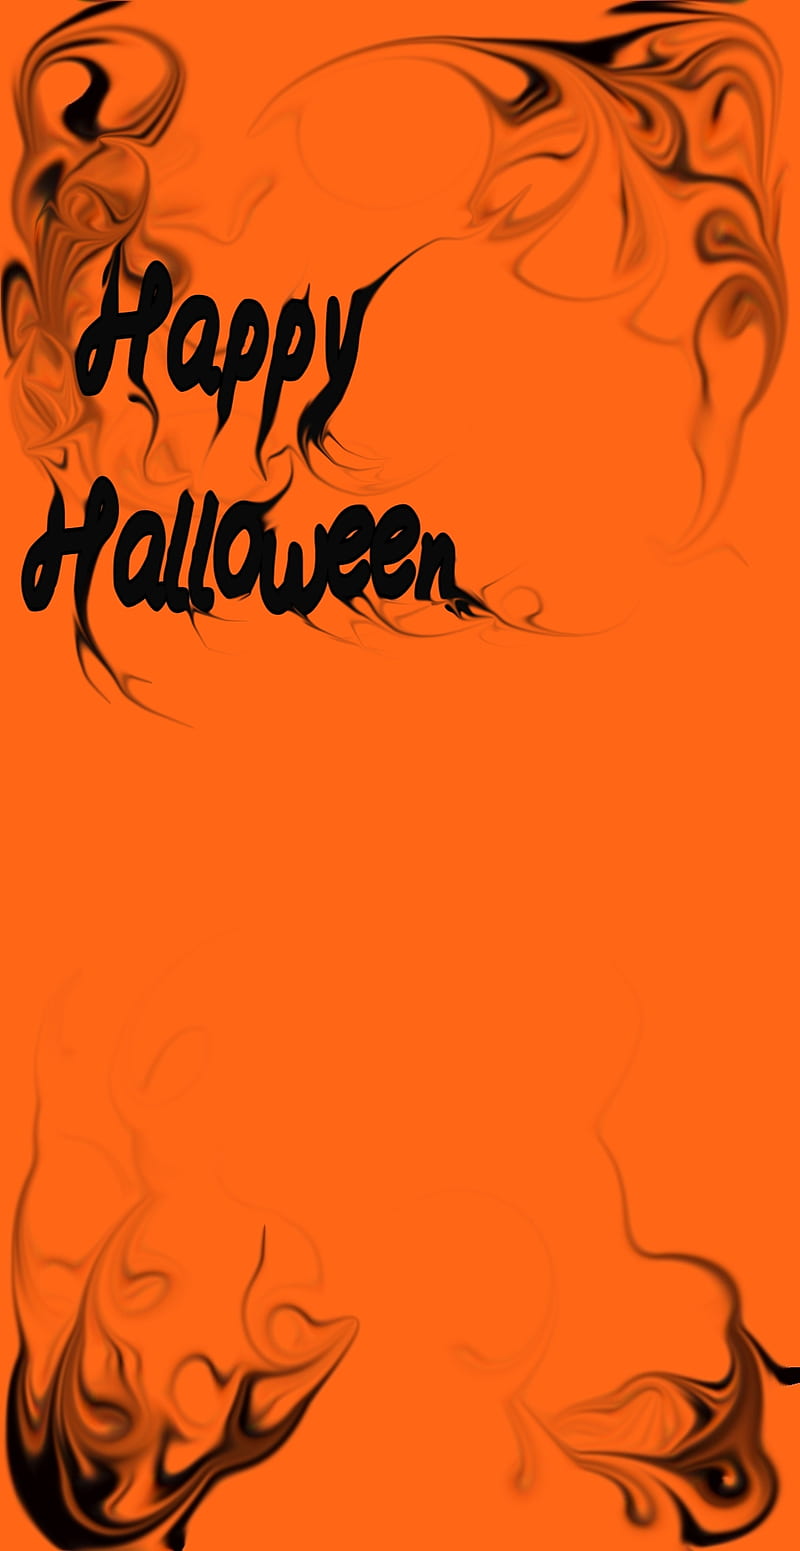 Scary Halloween iPhone wallpapers